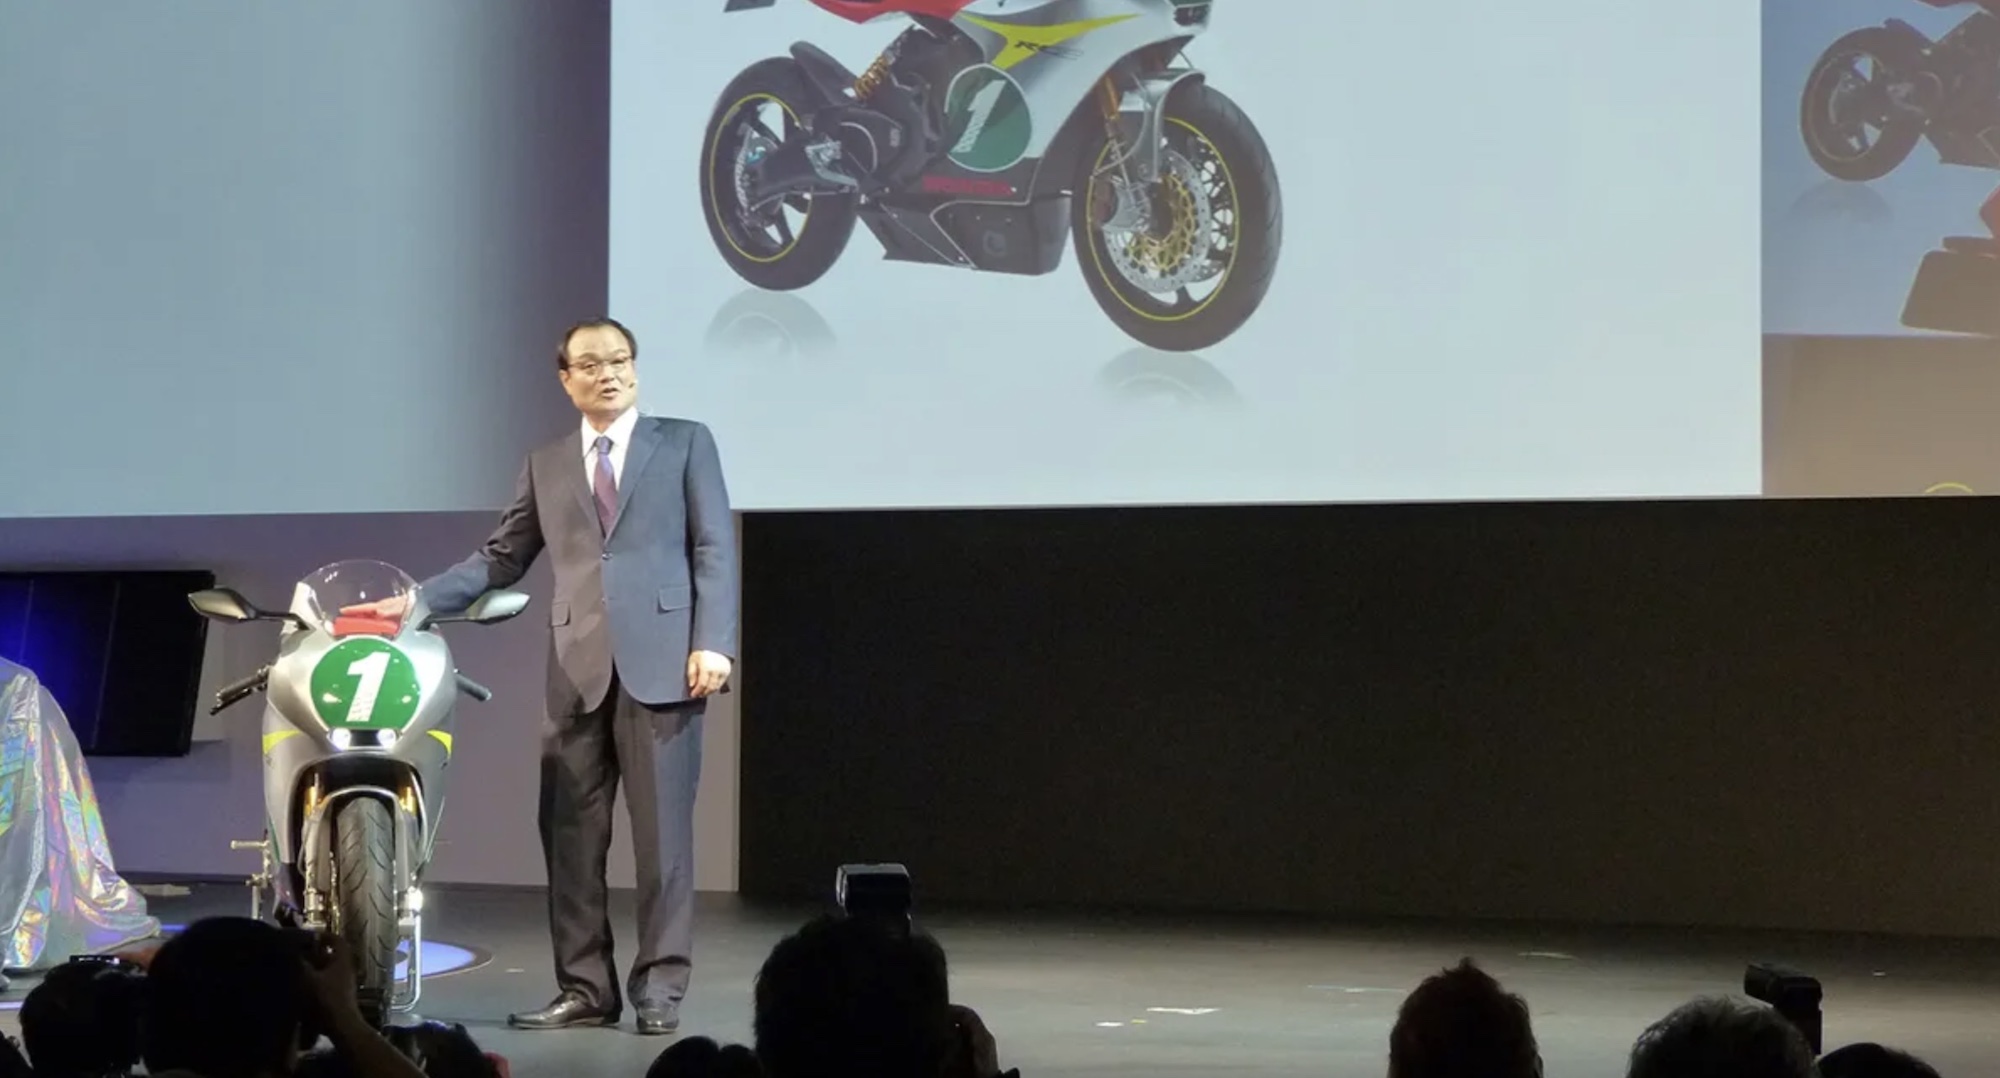 A view of Honda's RC-E, debuted at 2011's Japan Motor Show (Japan Mobility Show). Media provided by Honda.